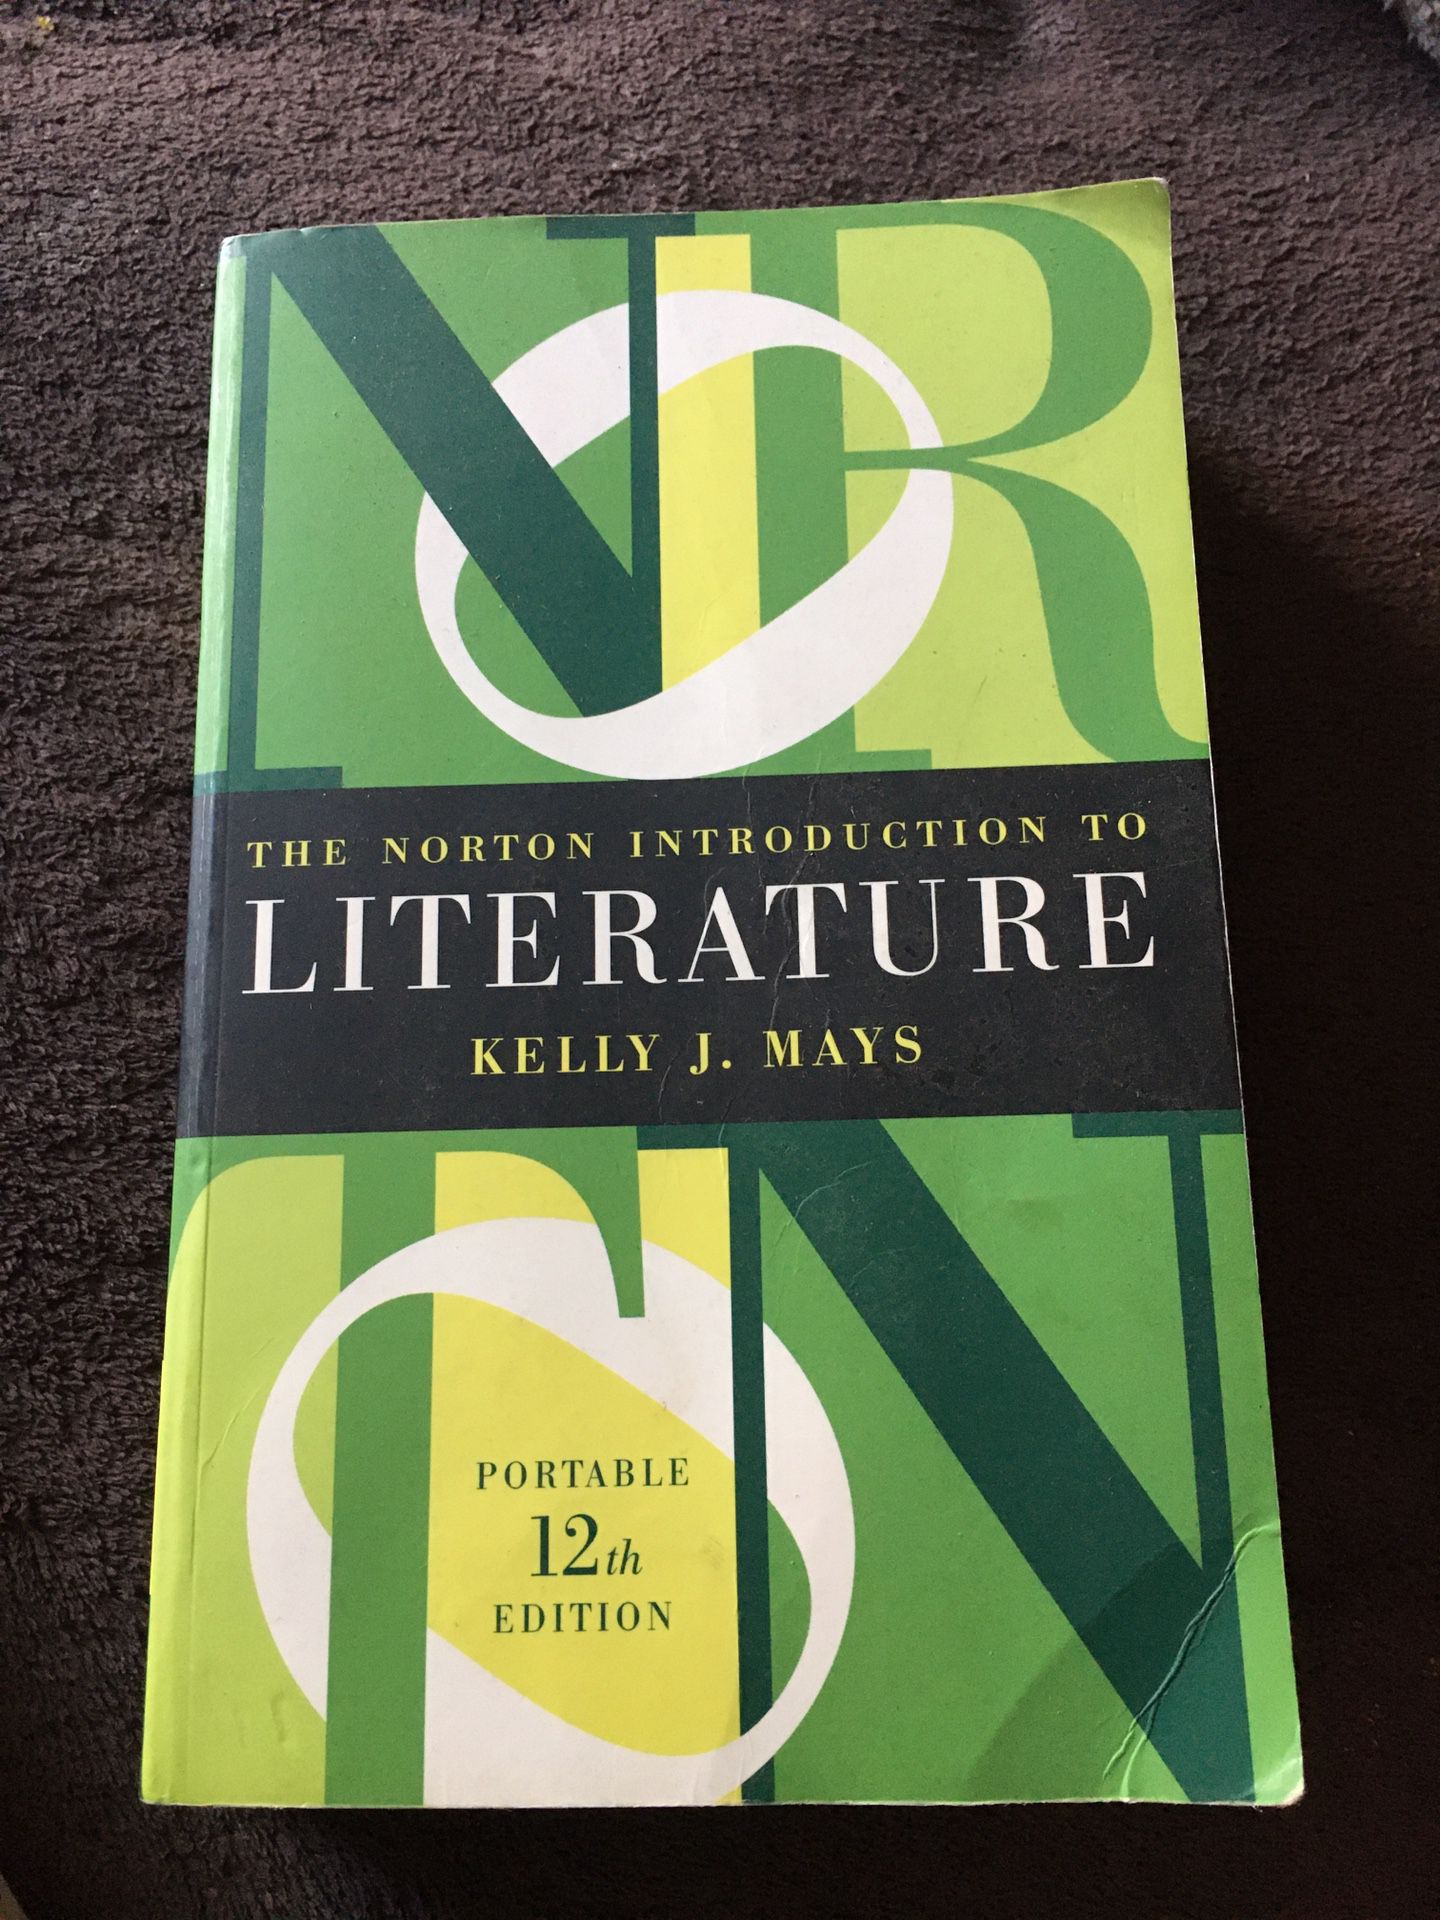 The Norton Introduction To Literature 12th Edition